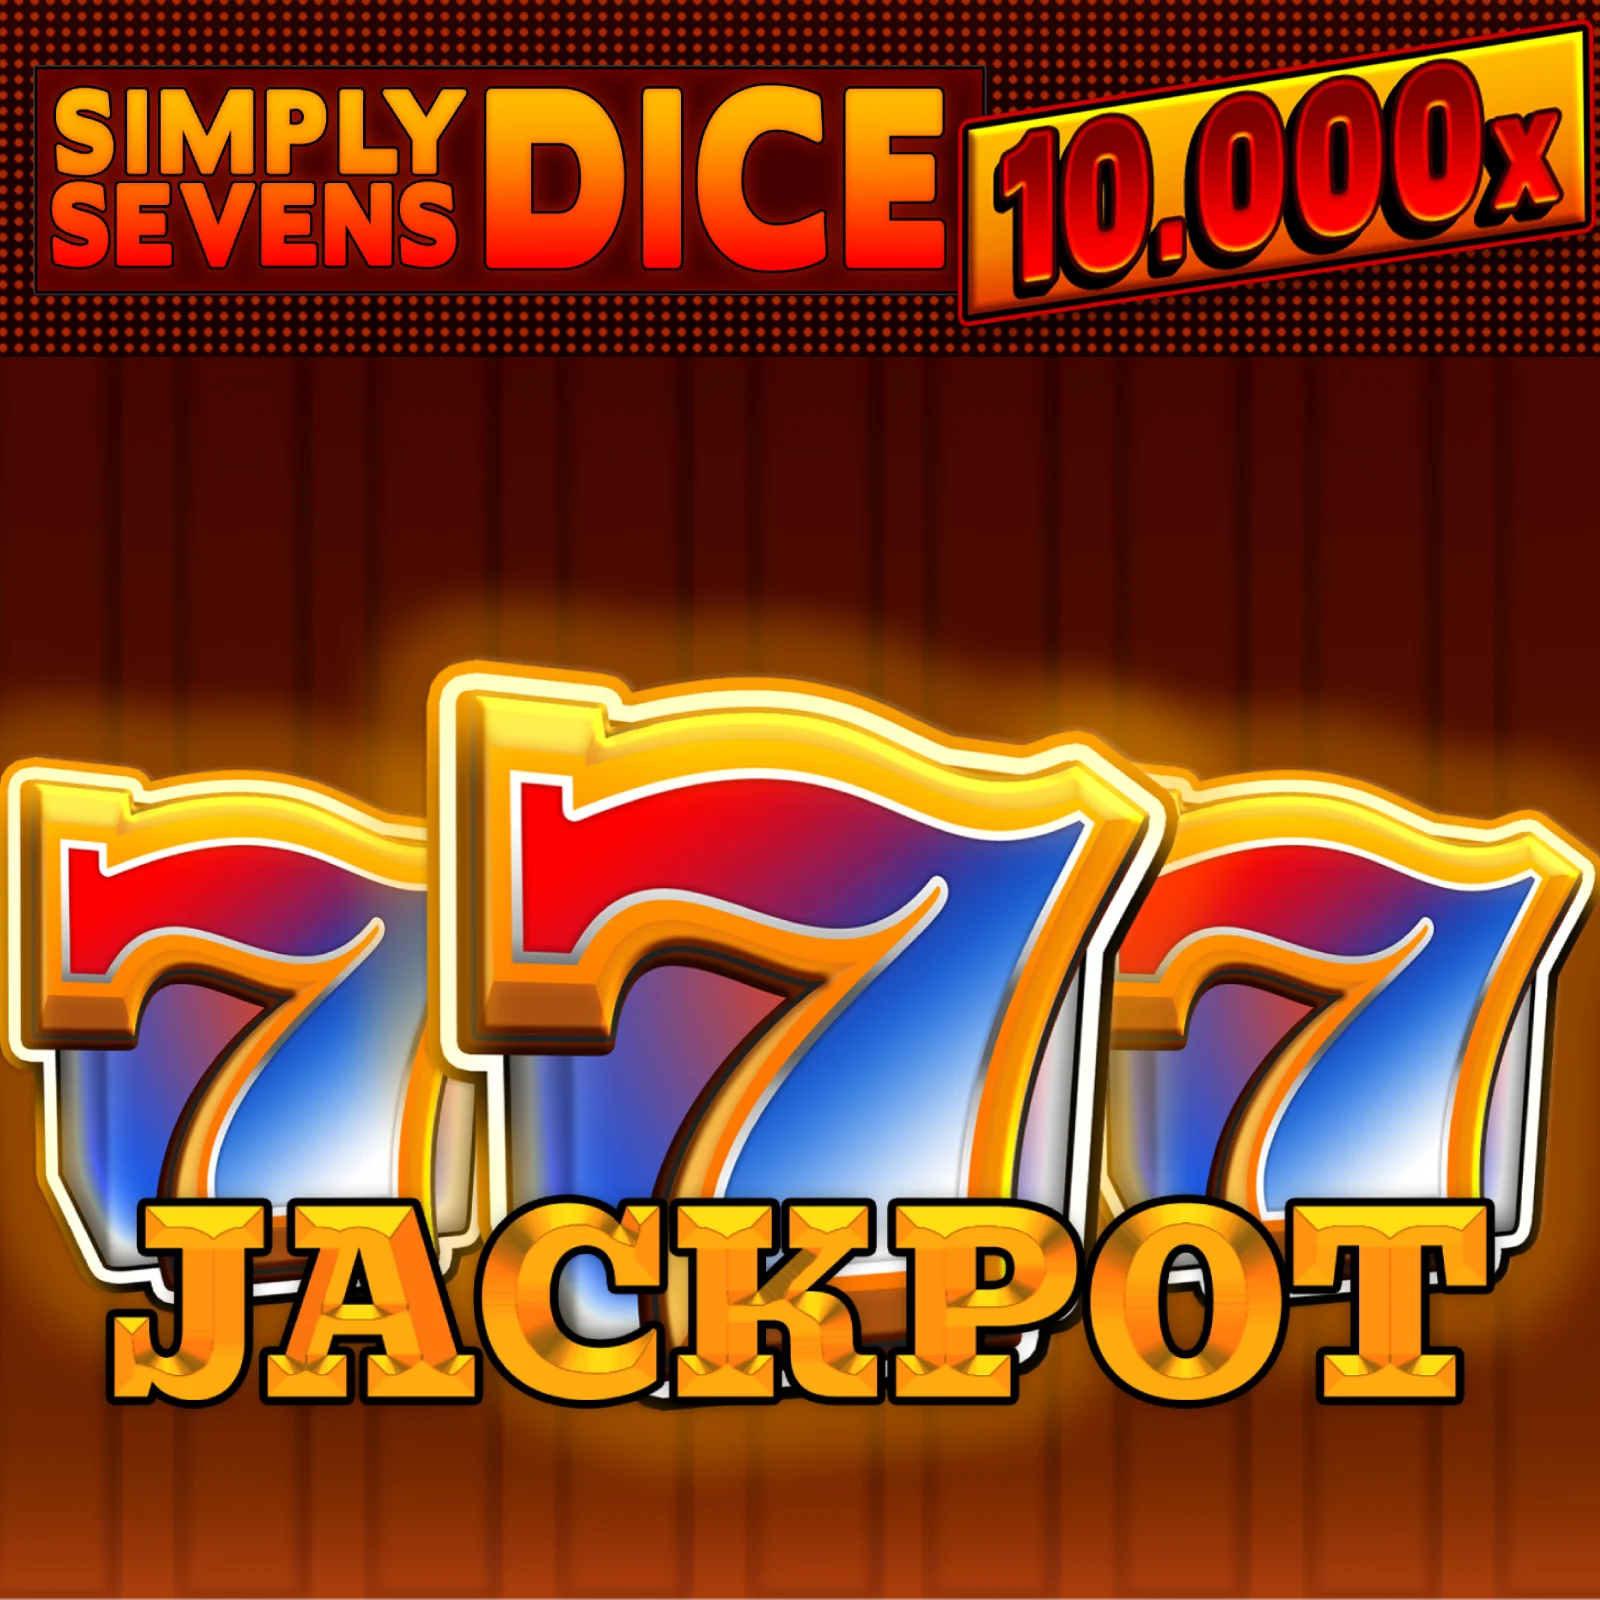 Play Simply Sevens Dice on Madisoncasino.be online casino